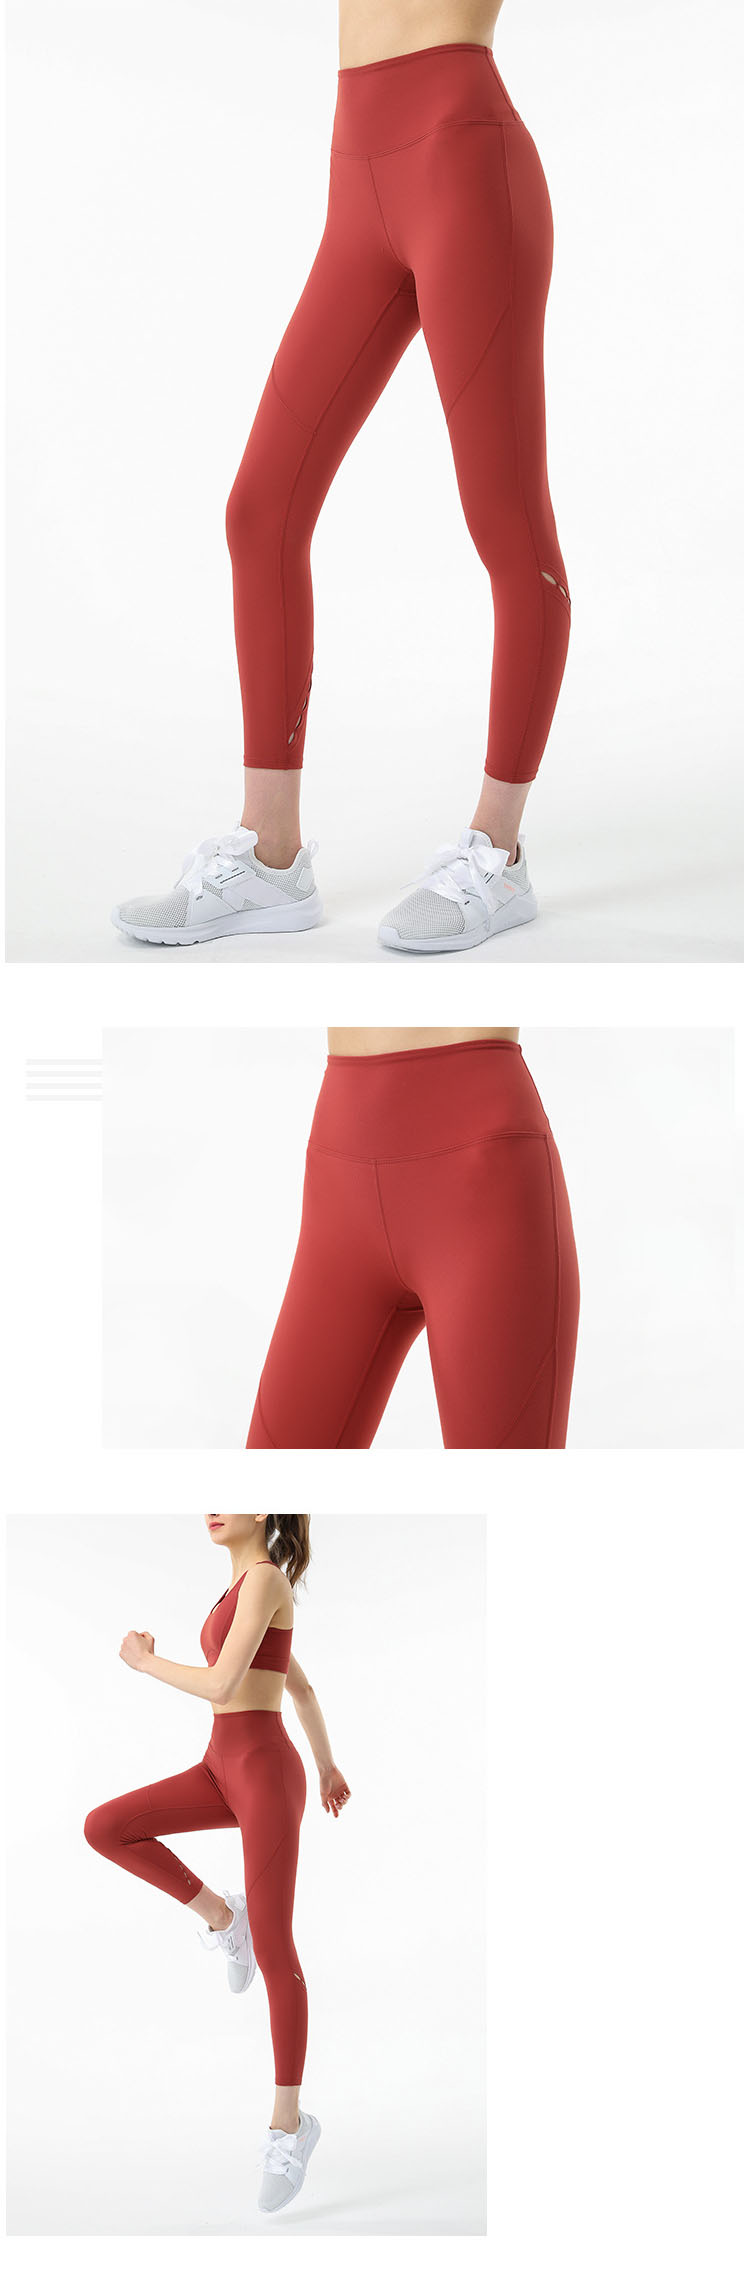 The side seams of the new season sports stretch pants use hand-made woven hollow processing; for example, hollow openings can be made on both sides of the side seams